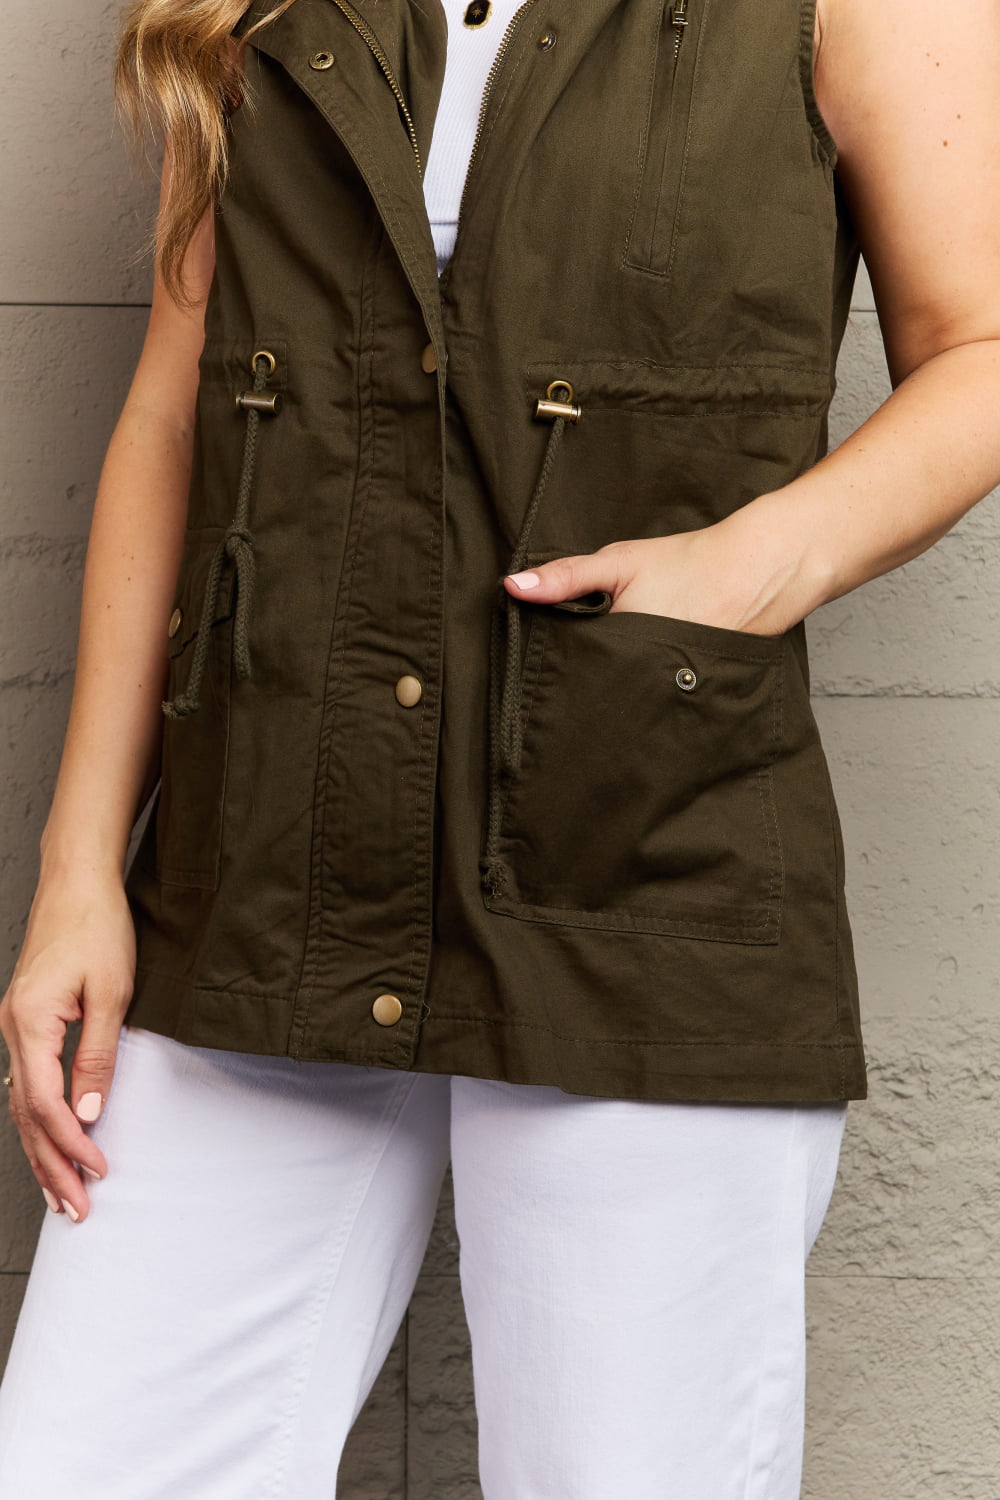 Zenana More To Come Full Size Military Hooded Vest - AllIn Computer